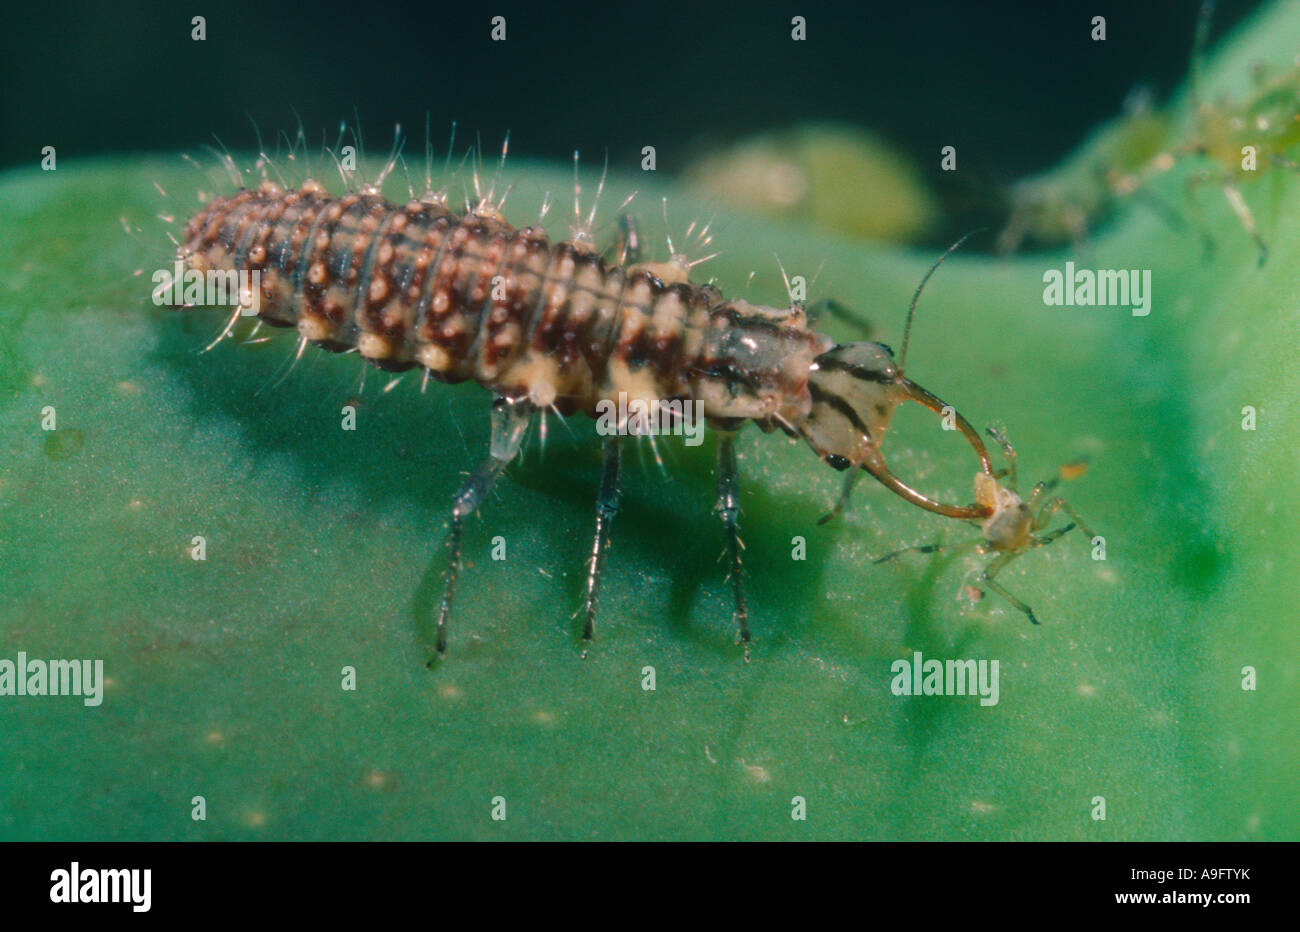 Green Lacewing, Family Chrysopidae. Larva eating an aphid Stock Photo